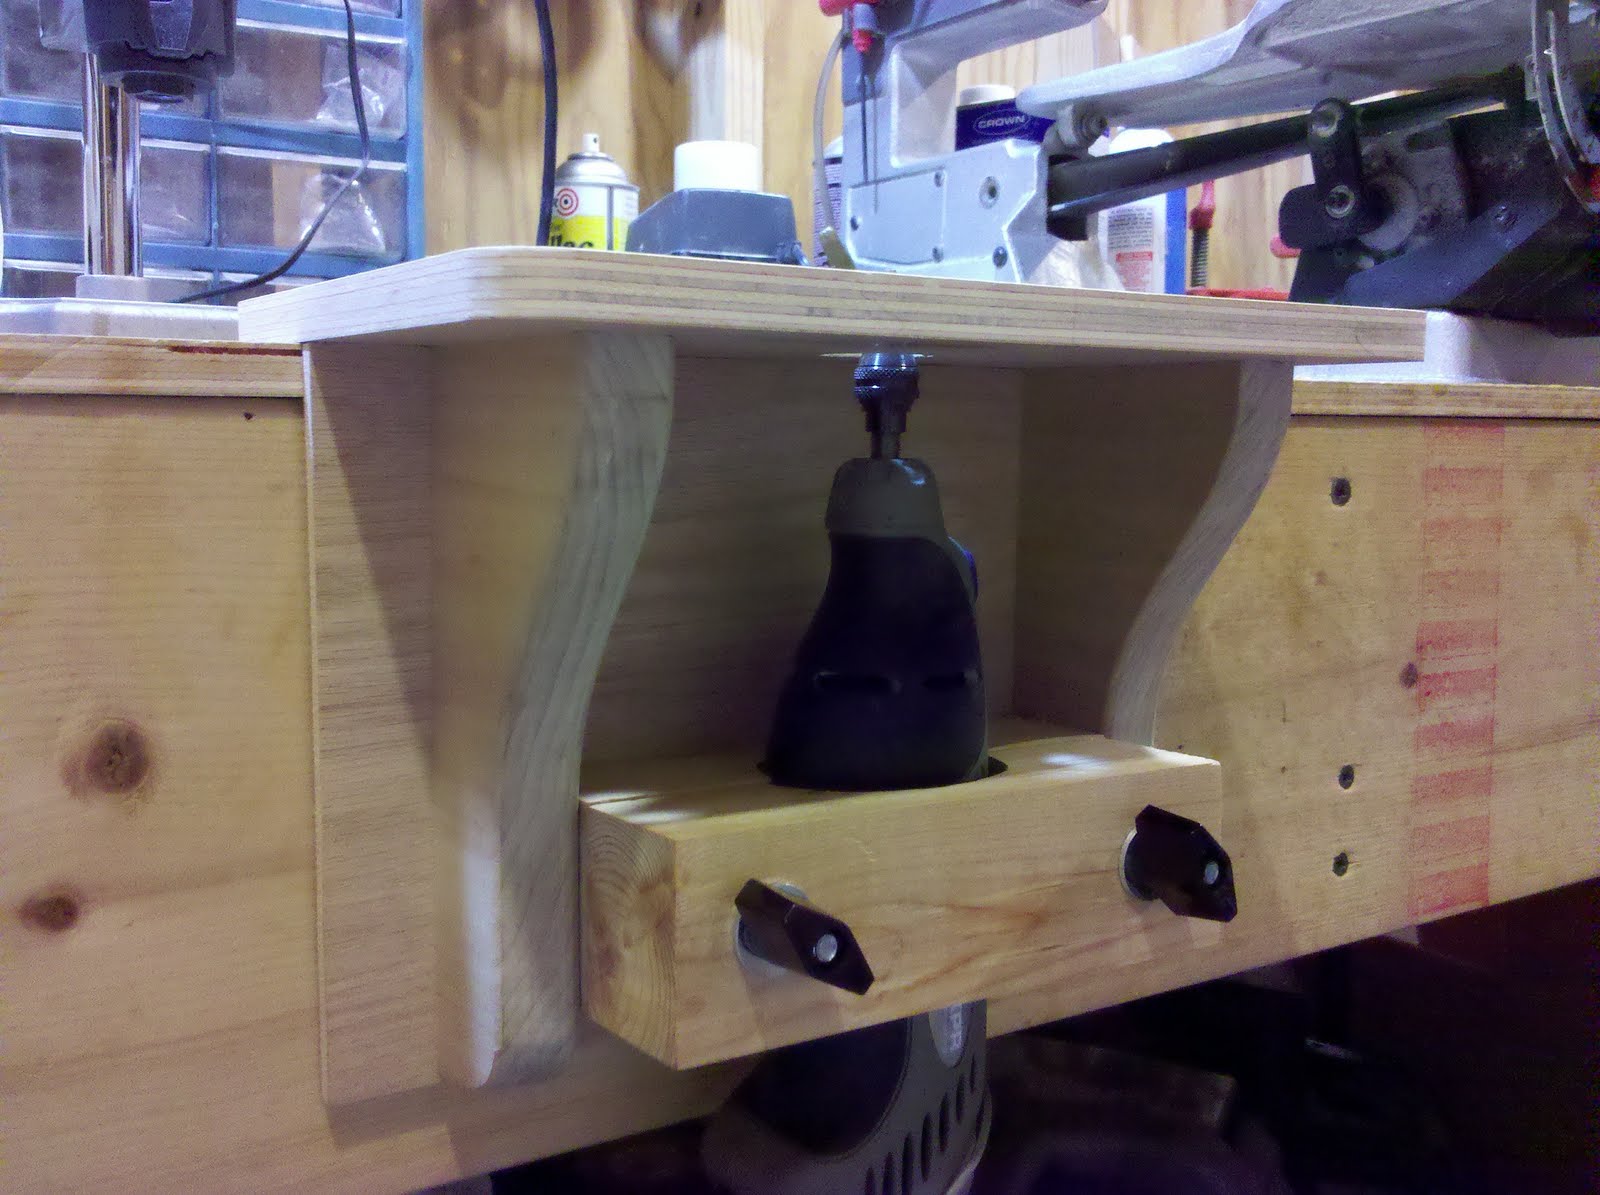 Jim Brown's Workshop: Made my own router table for the Dremel